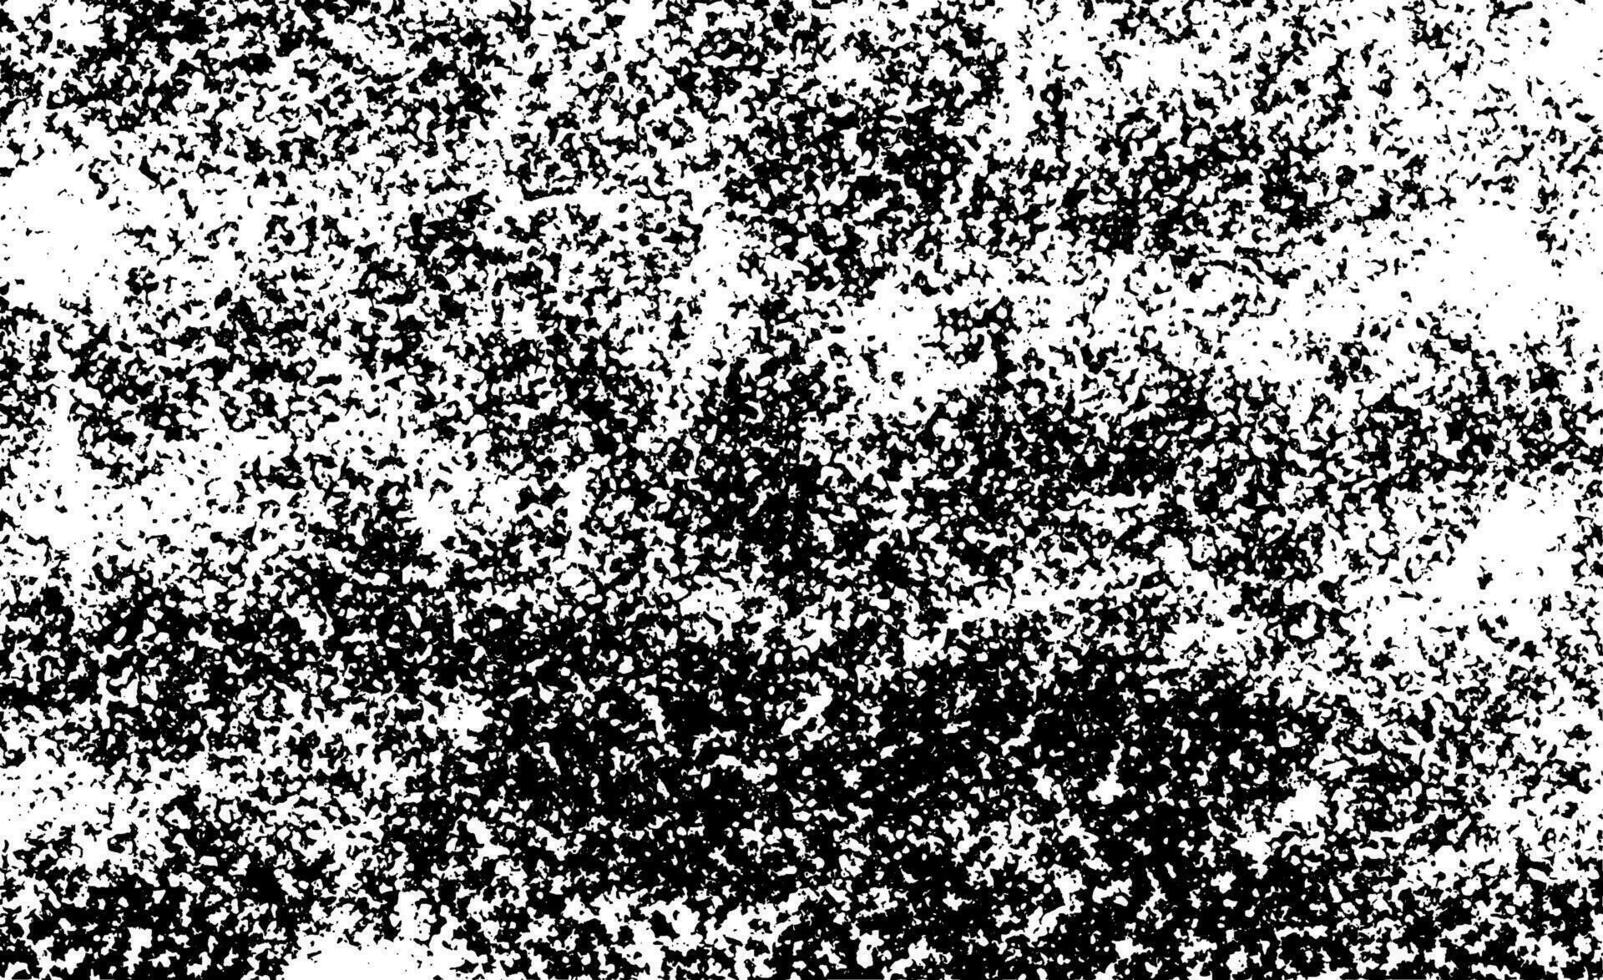 Dust and Scratched Textured Backgrounds.Grunge white and black wall background.Dark Messy Dust Overlay Distress Background. Easy To Create Abstract Dotted, Scratched vector